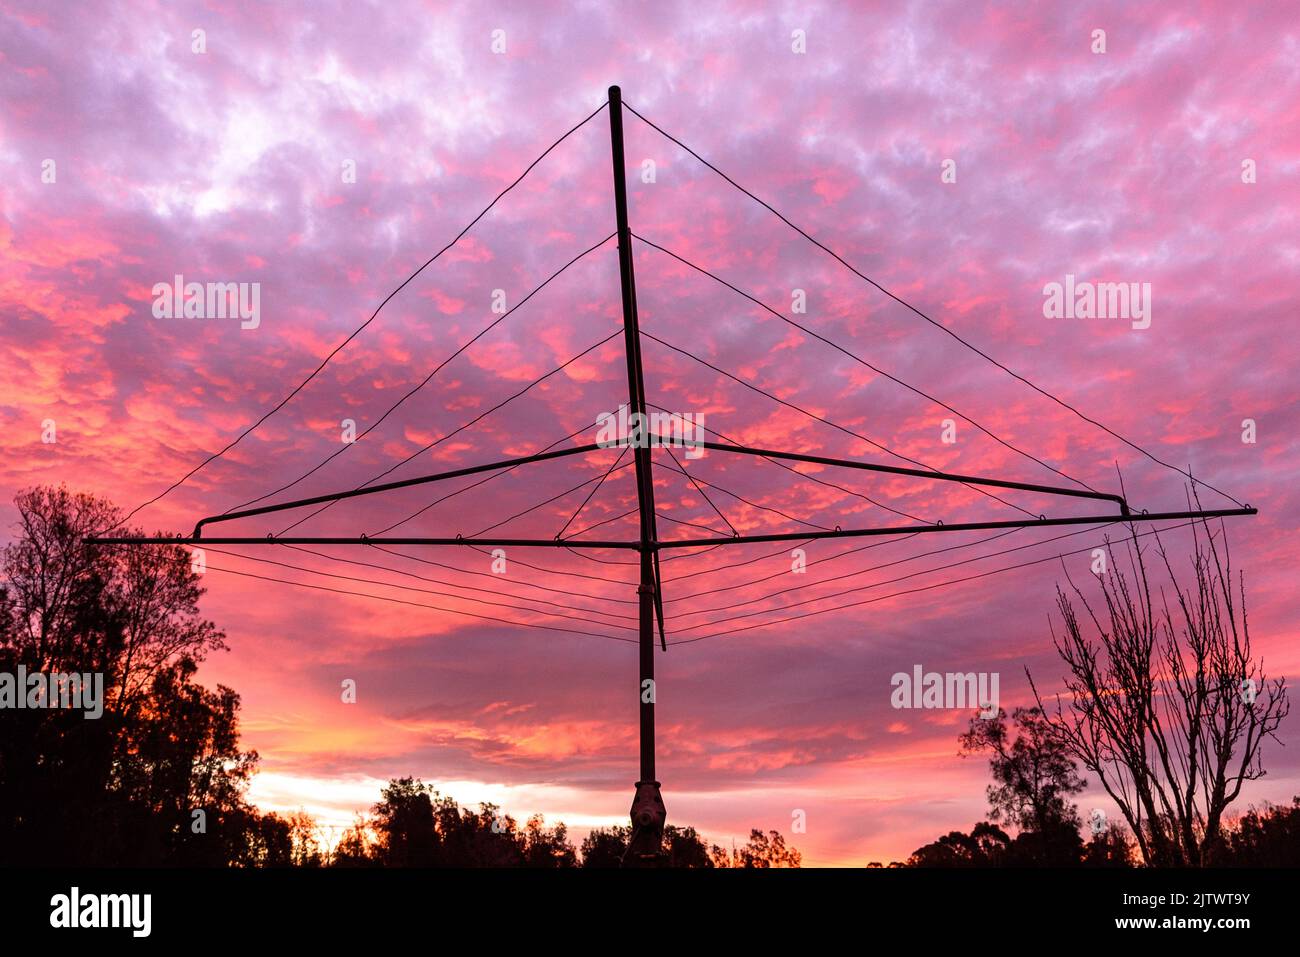 A Hills Hoist clothes line at sunset with a dramatic sky Stock Photo